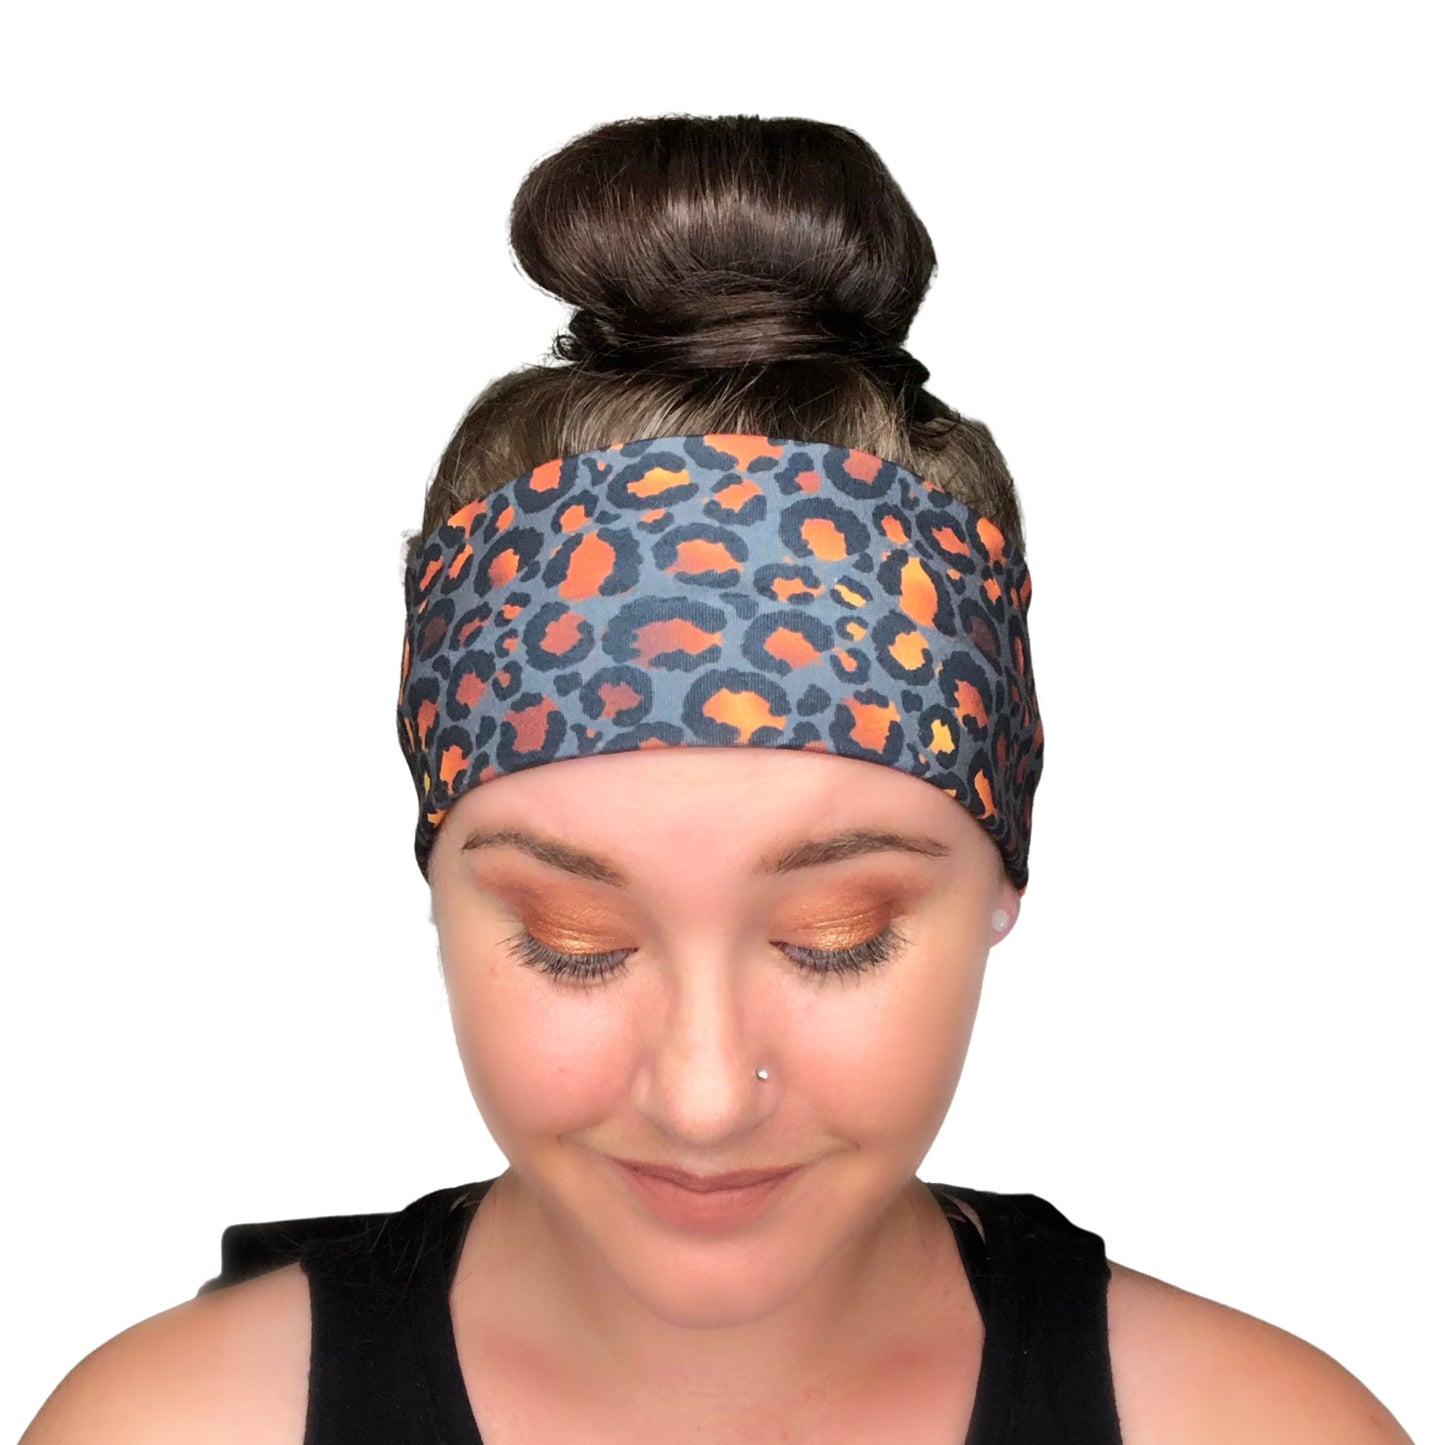 Navy Blue and Coral Floral Headband for Women